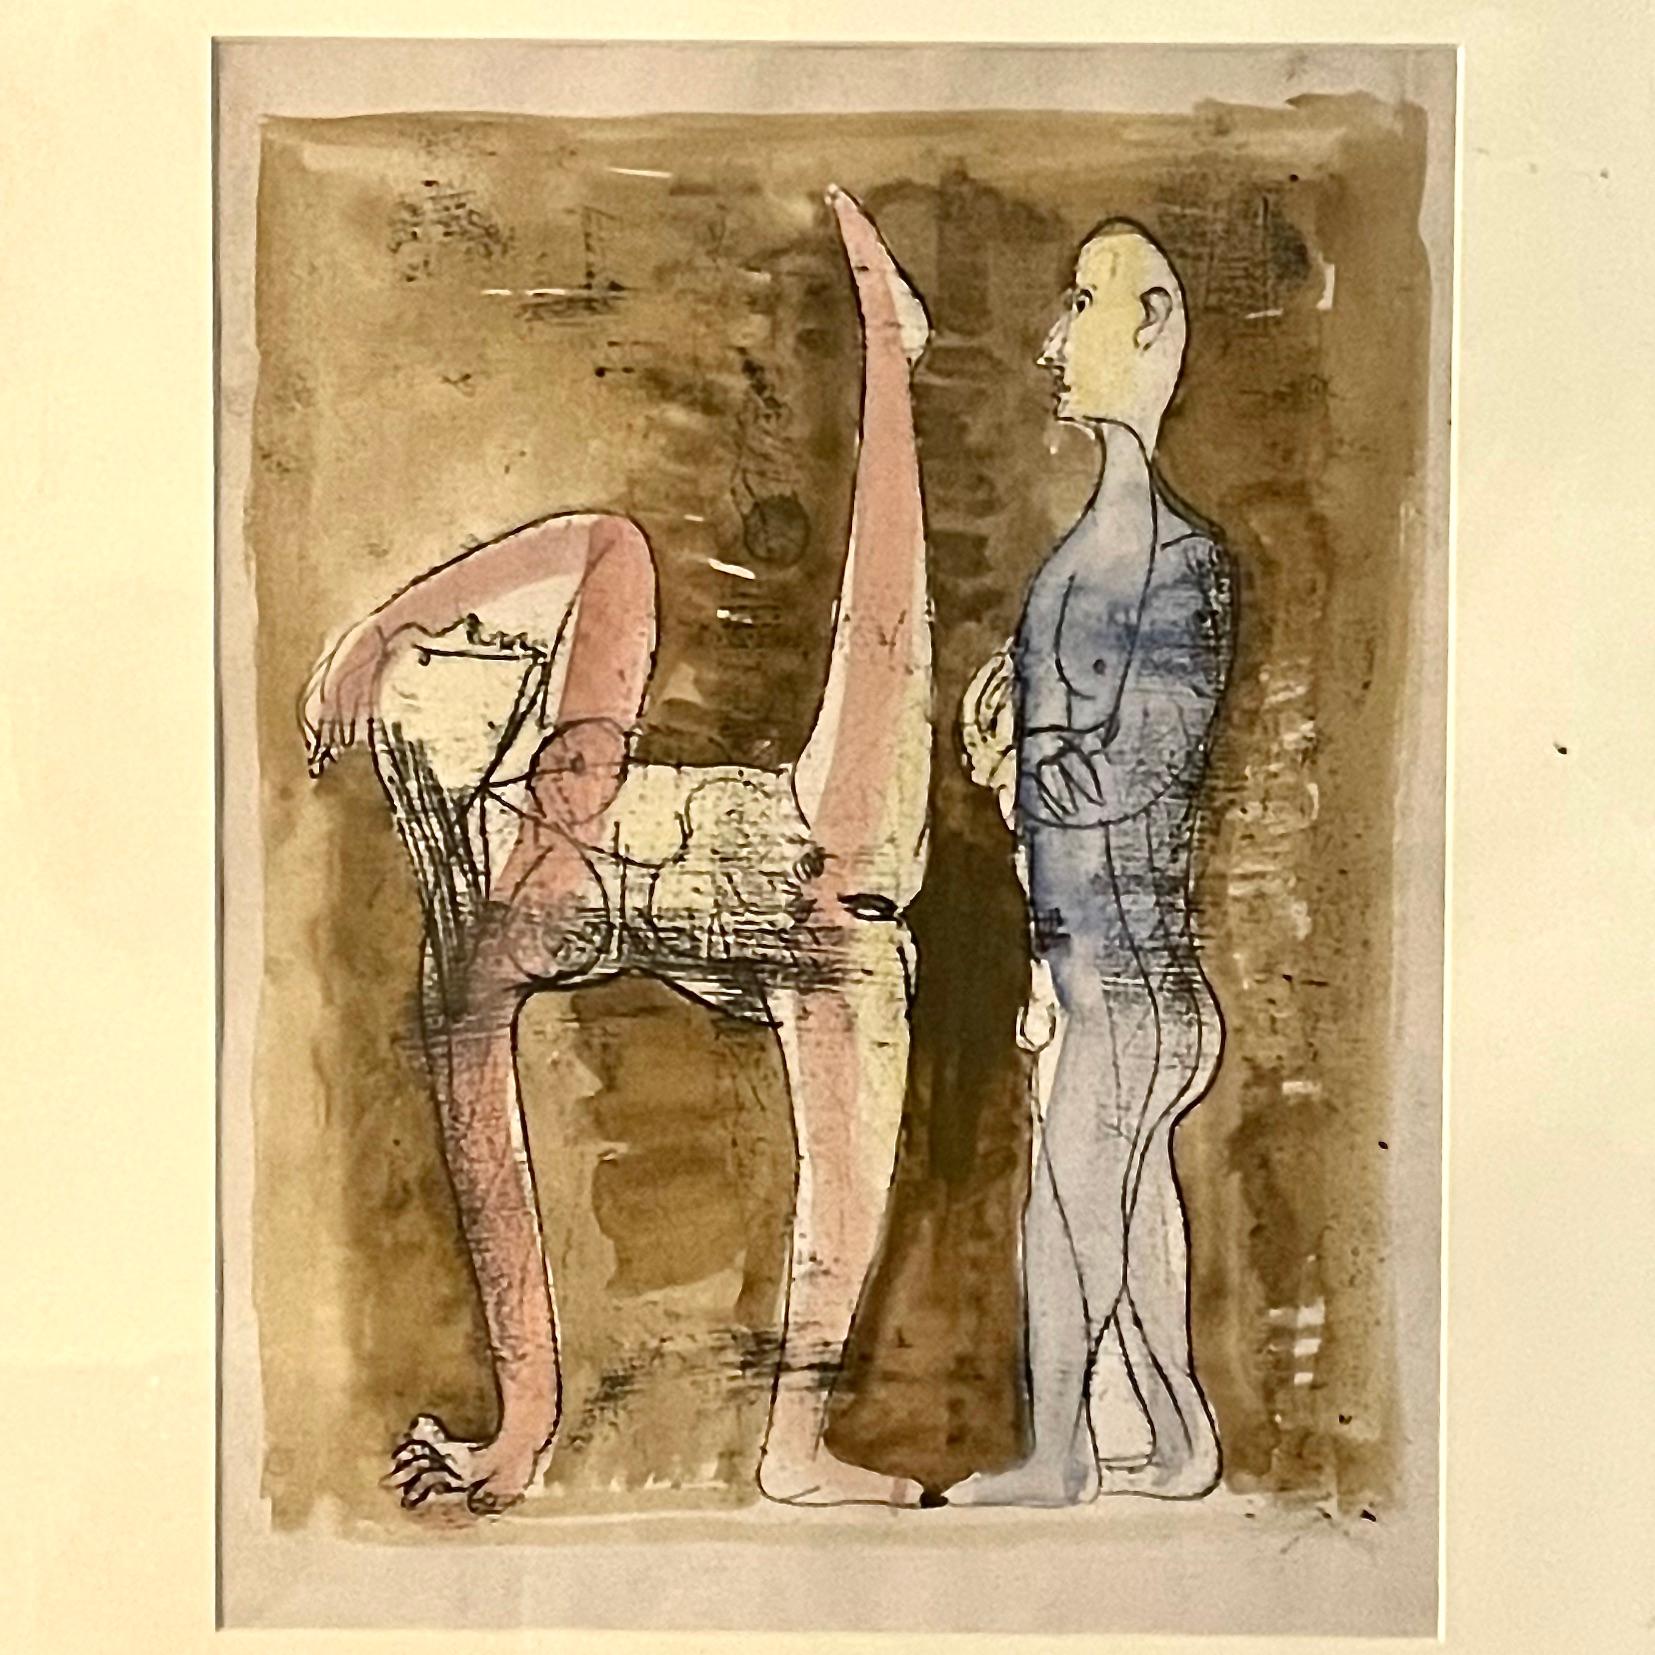 As an artist Jankel Adler personified the European avant-garde in Britain in the 1940s, becoming a central figure in the art worlds of Glasgow and then London. Though born in Poland, Adler worked with Paul Klee in Germany in the 1920s, before being